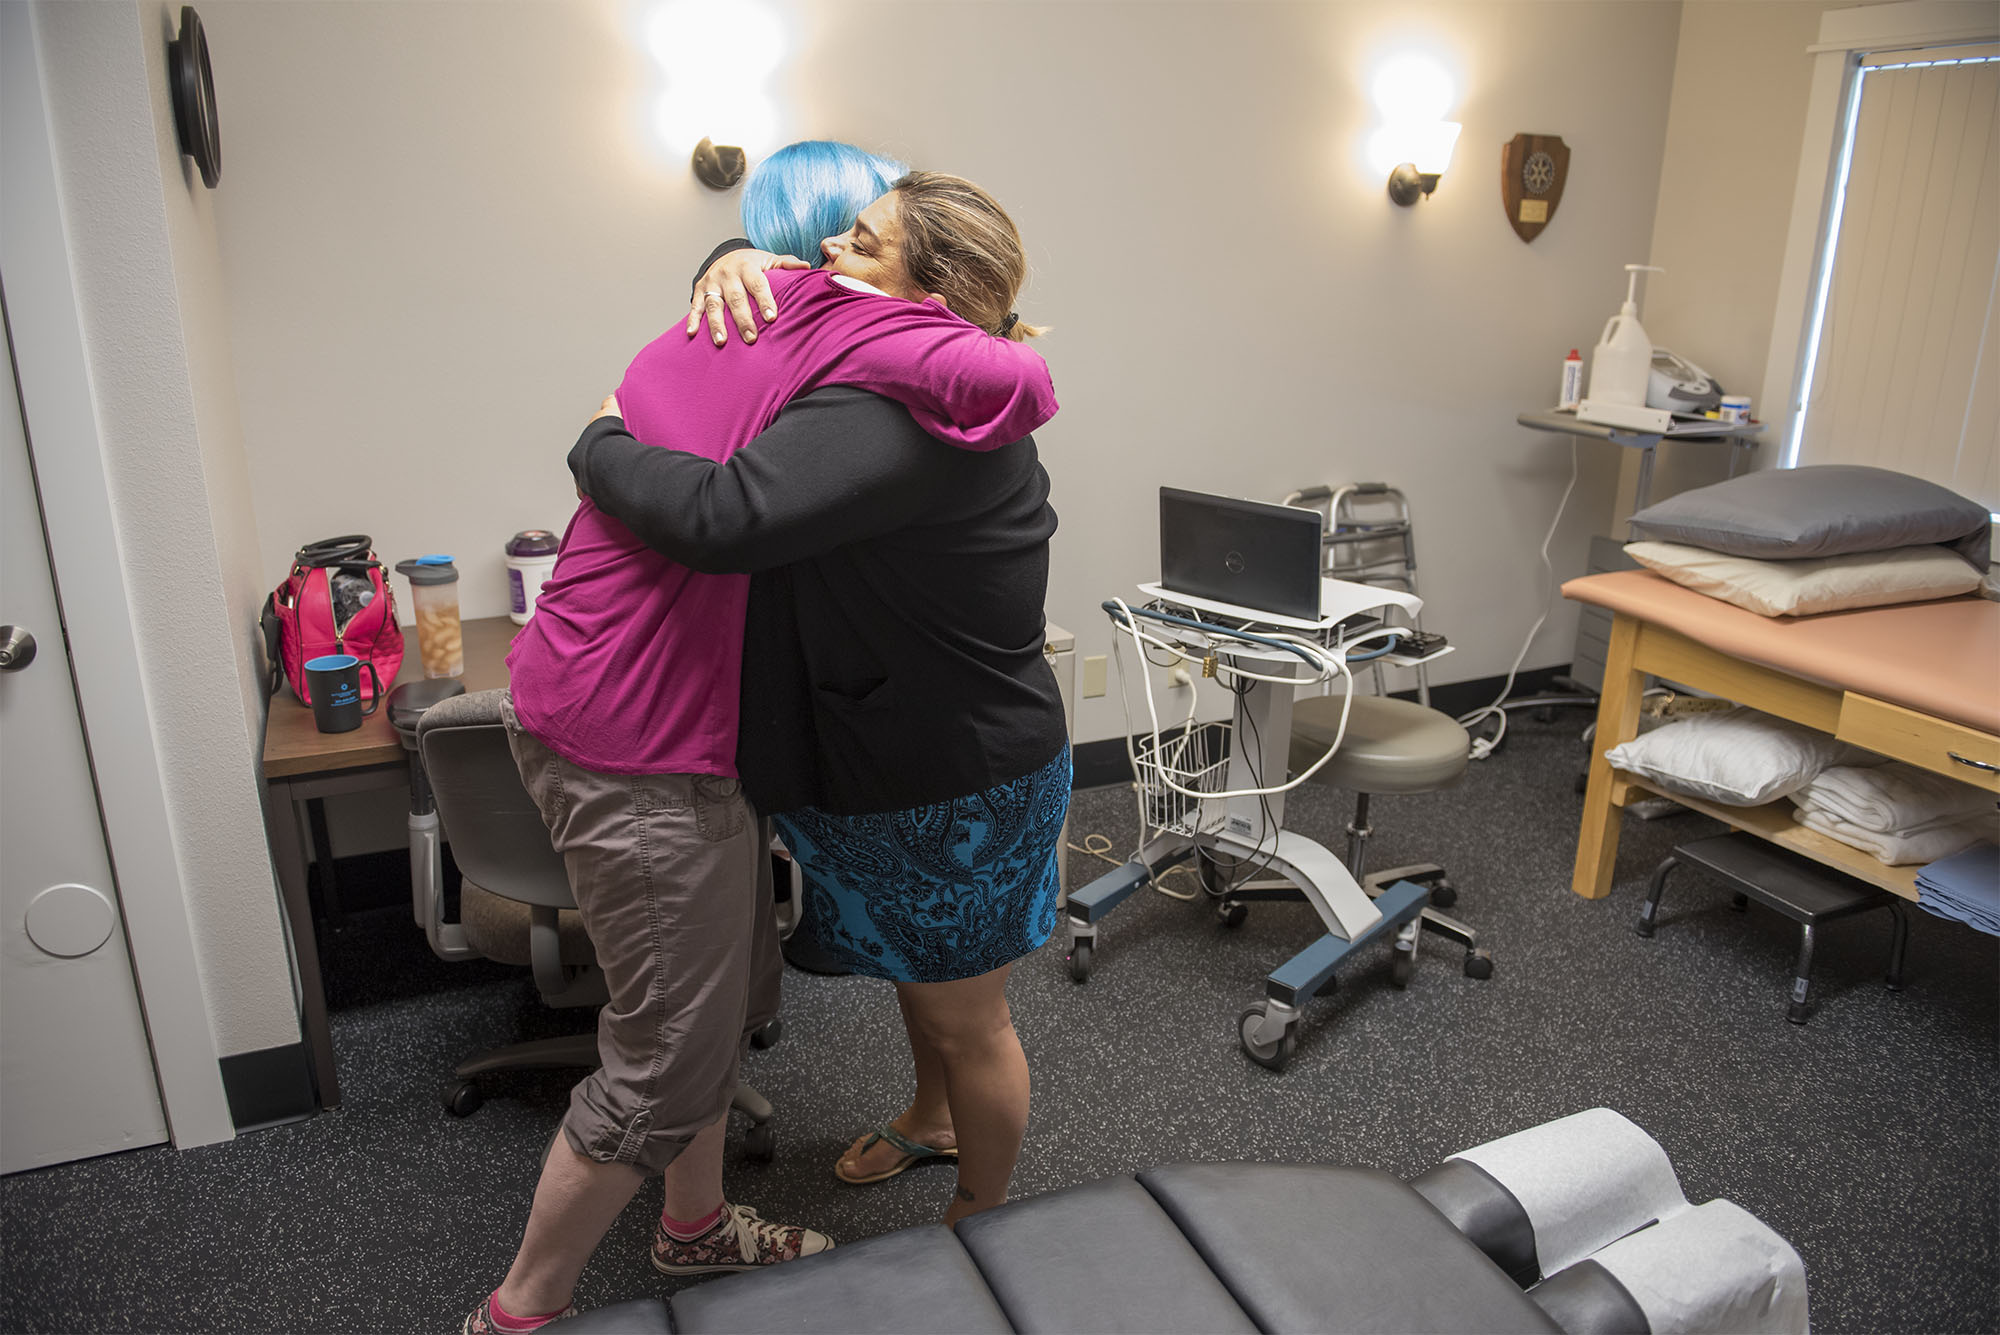  Timberly Eyssen hugs Chiropractic Physician Gloria Arroyo-Grubbs during a chiropractic visit at Battleground Health Care after Eyssen remarks that her neck has improved since their last visit, on Wednesday, Aug. 25, 2018. 